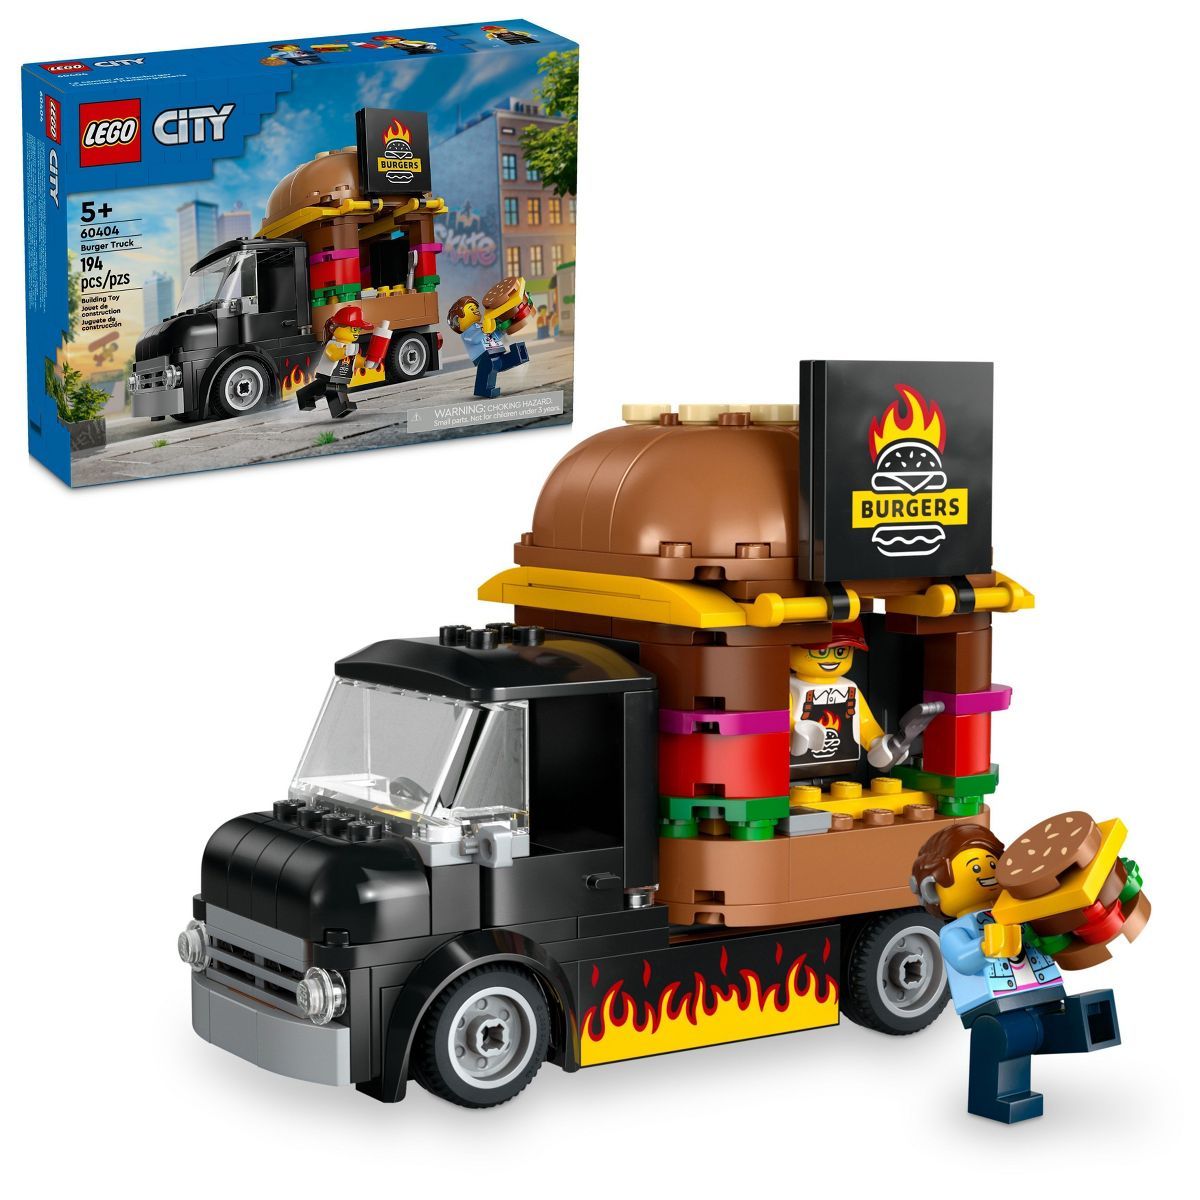 LEGO City Burger Truck Toy Building Set, Pretend Play Toy 60404 | Target